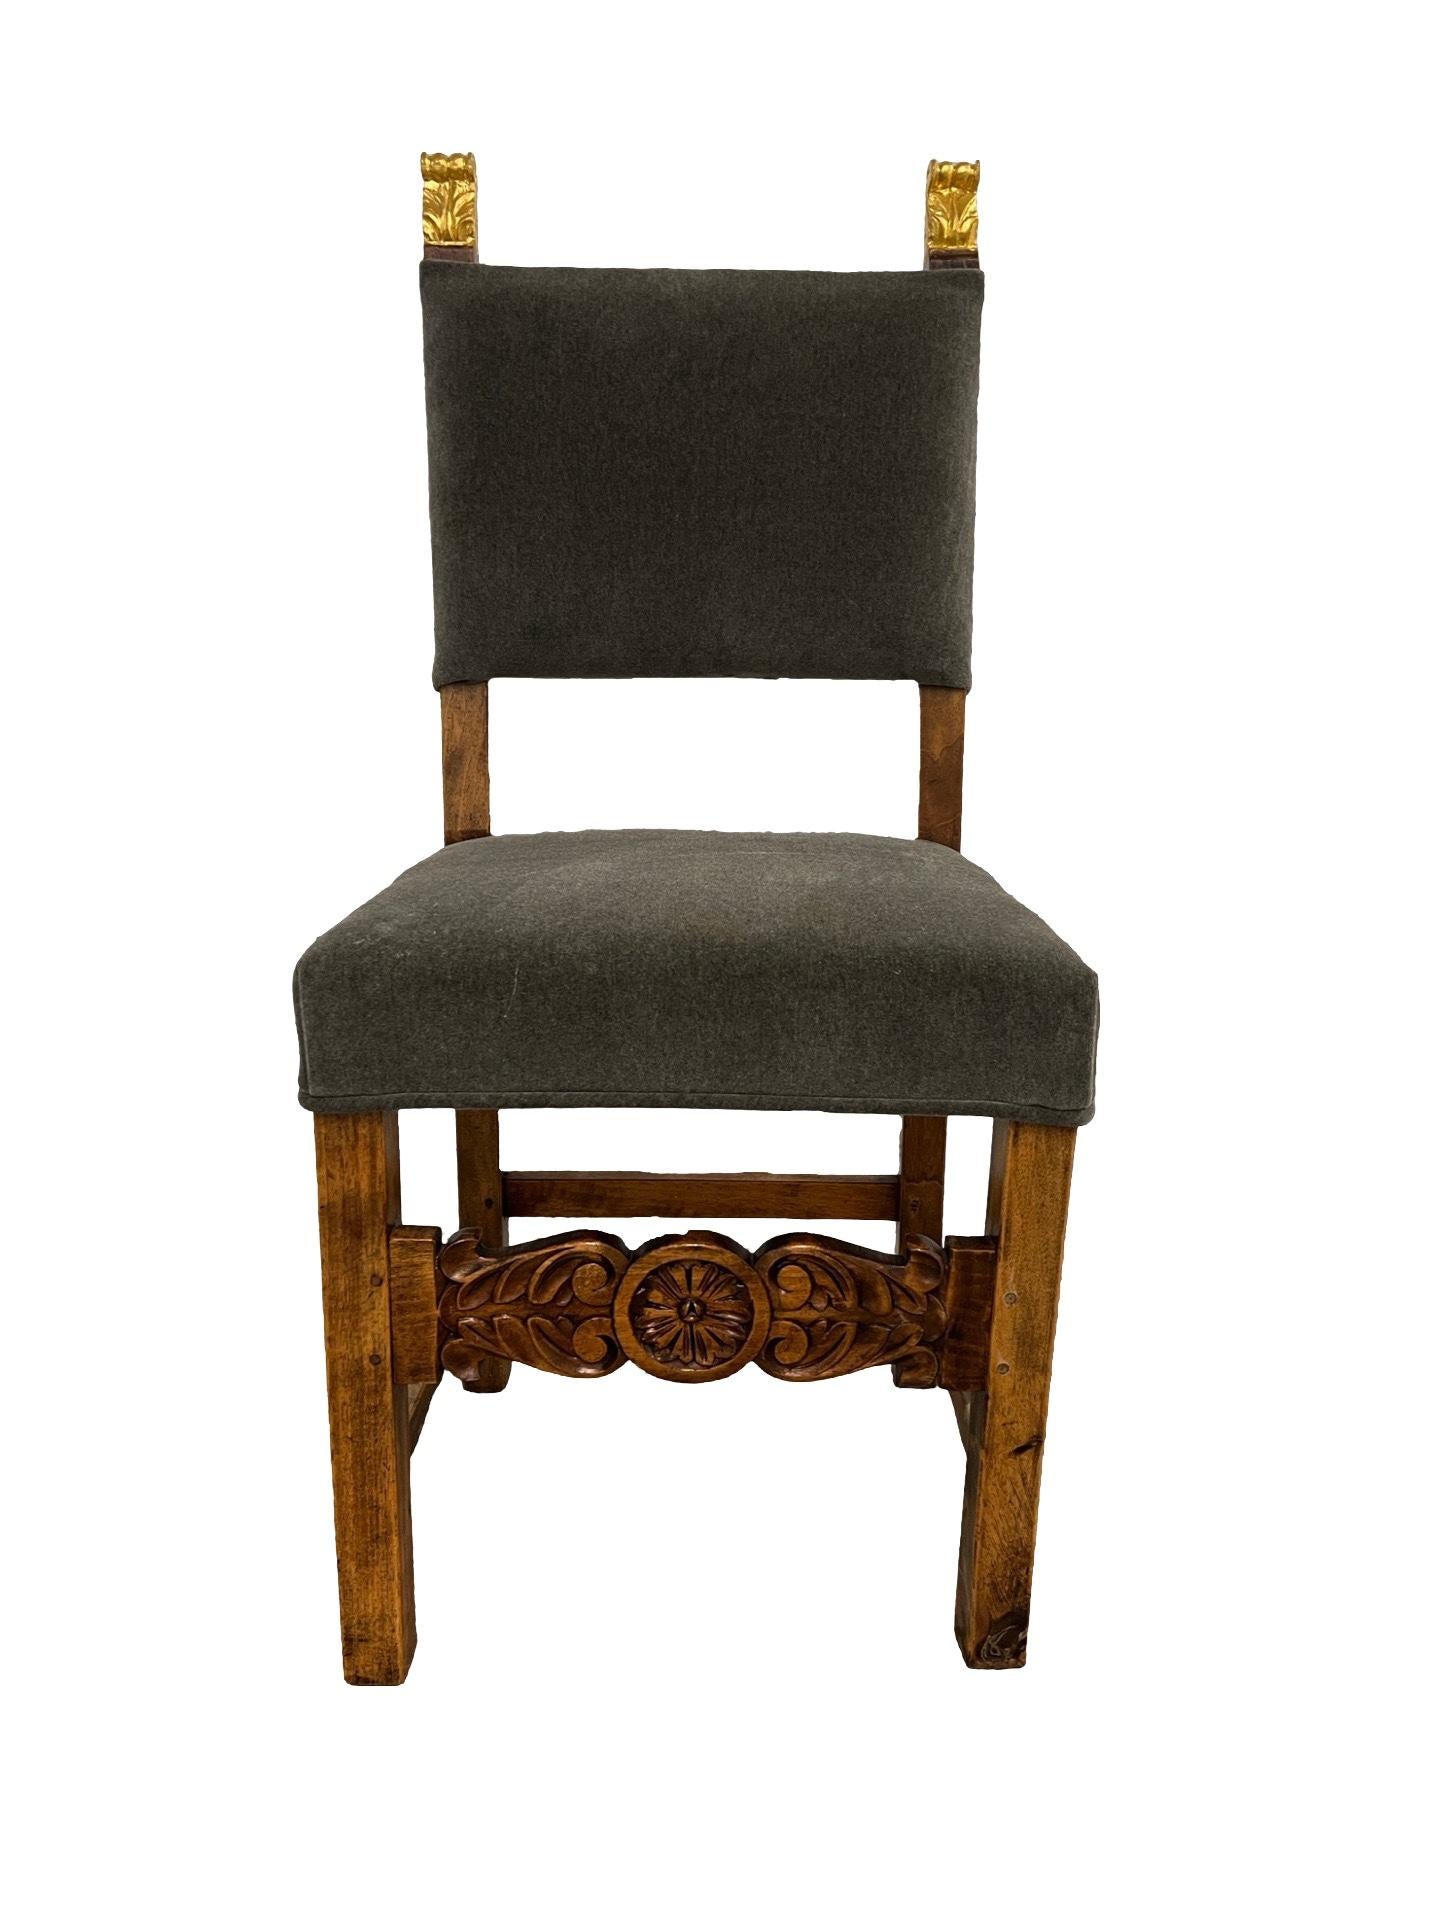 Spanish, early to mid 19th century.

A very attractive antique Spanish side chair with gilt wood finials, carved skirt rail and upholstered with a gray mohair fabric back and seat. 

Measures: 34.125